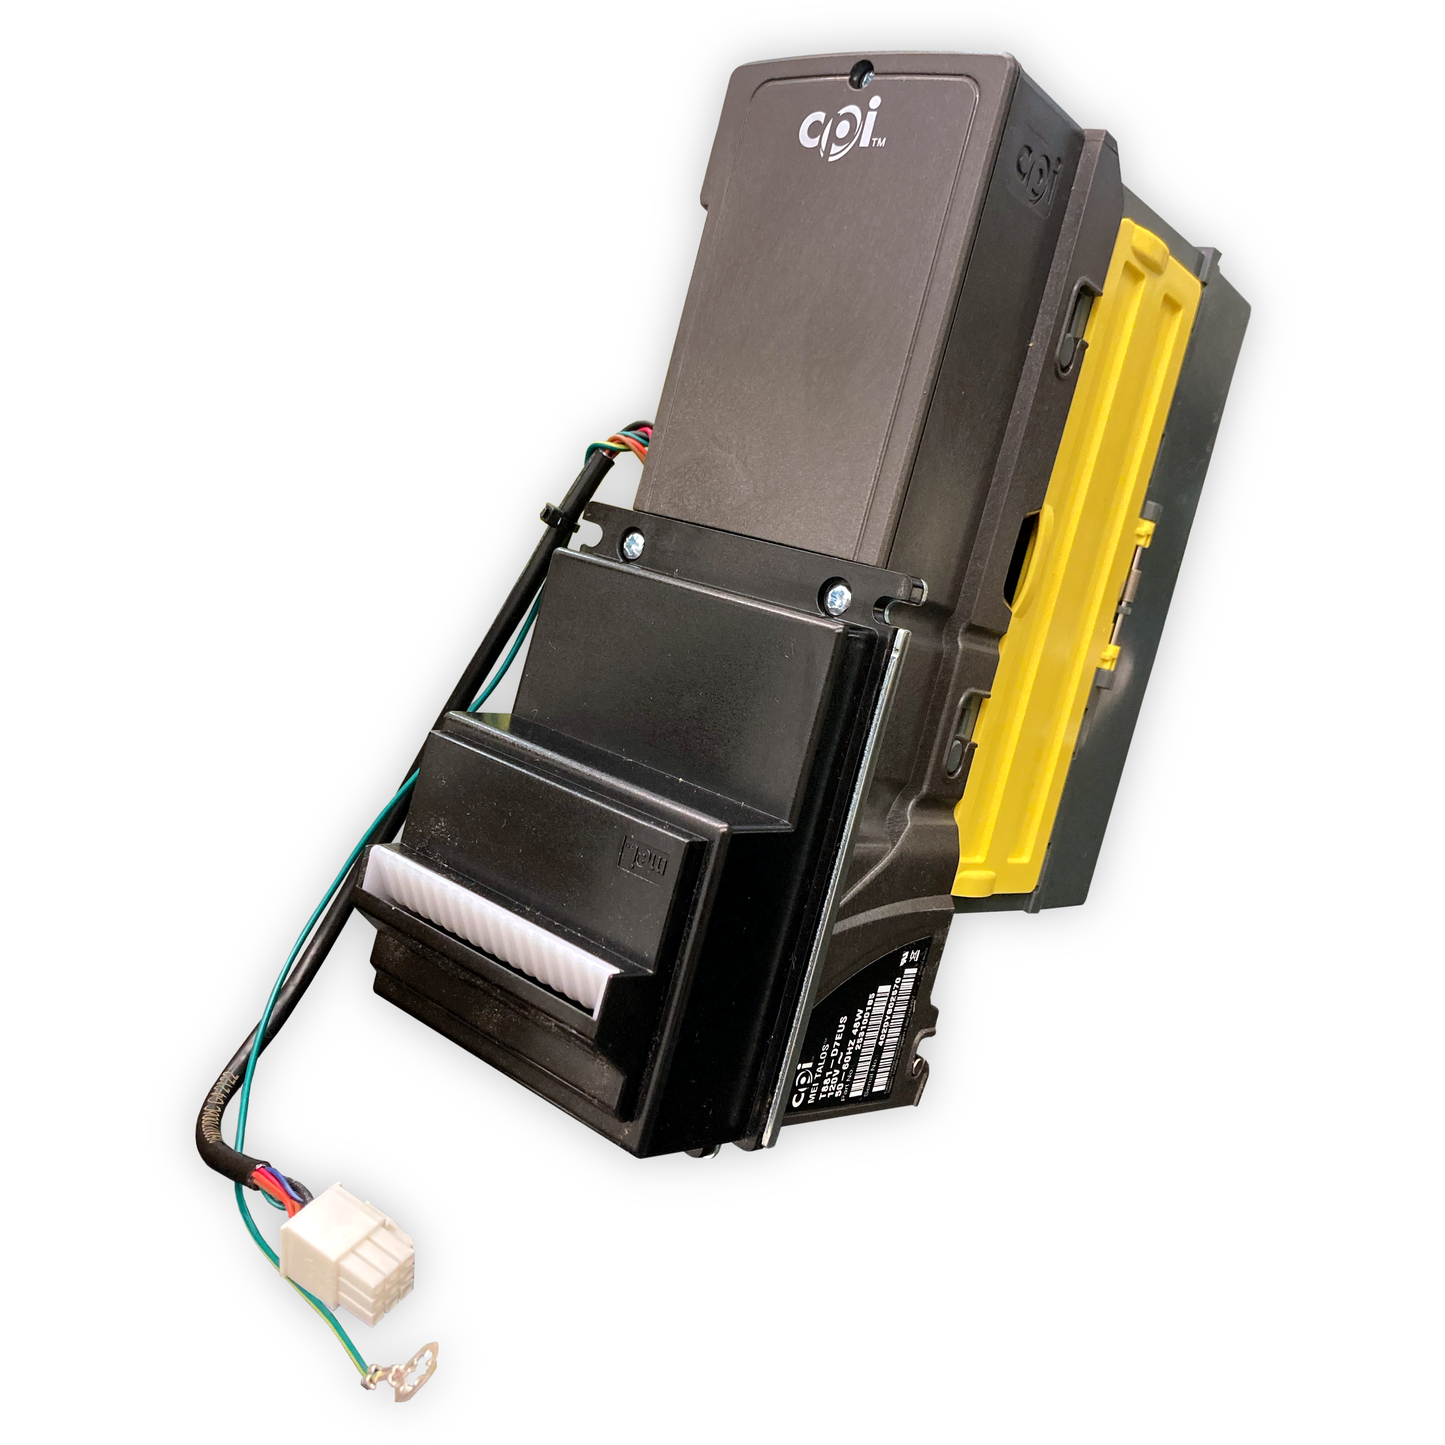 The CPI Bill Acceptor 100% backwards capability enables seamless integration with existing bezels to streamline spares inventory.